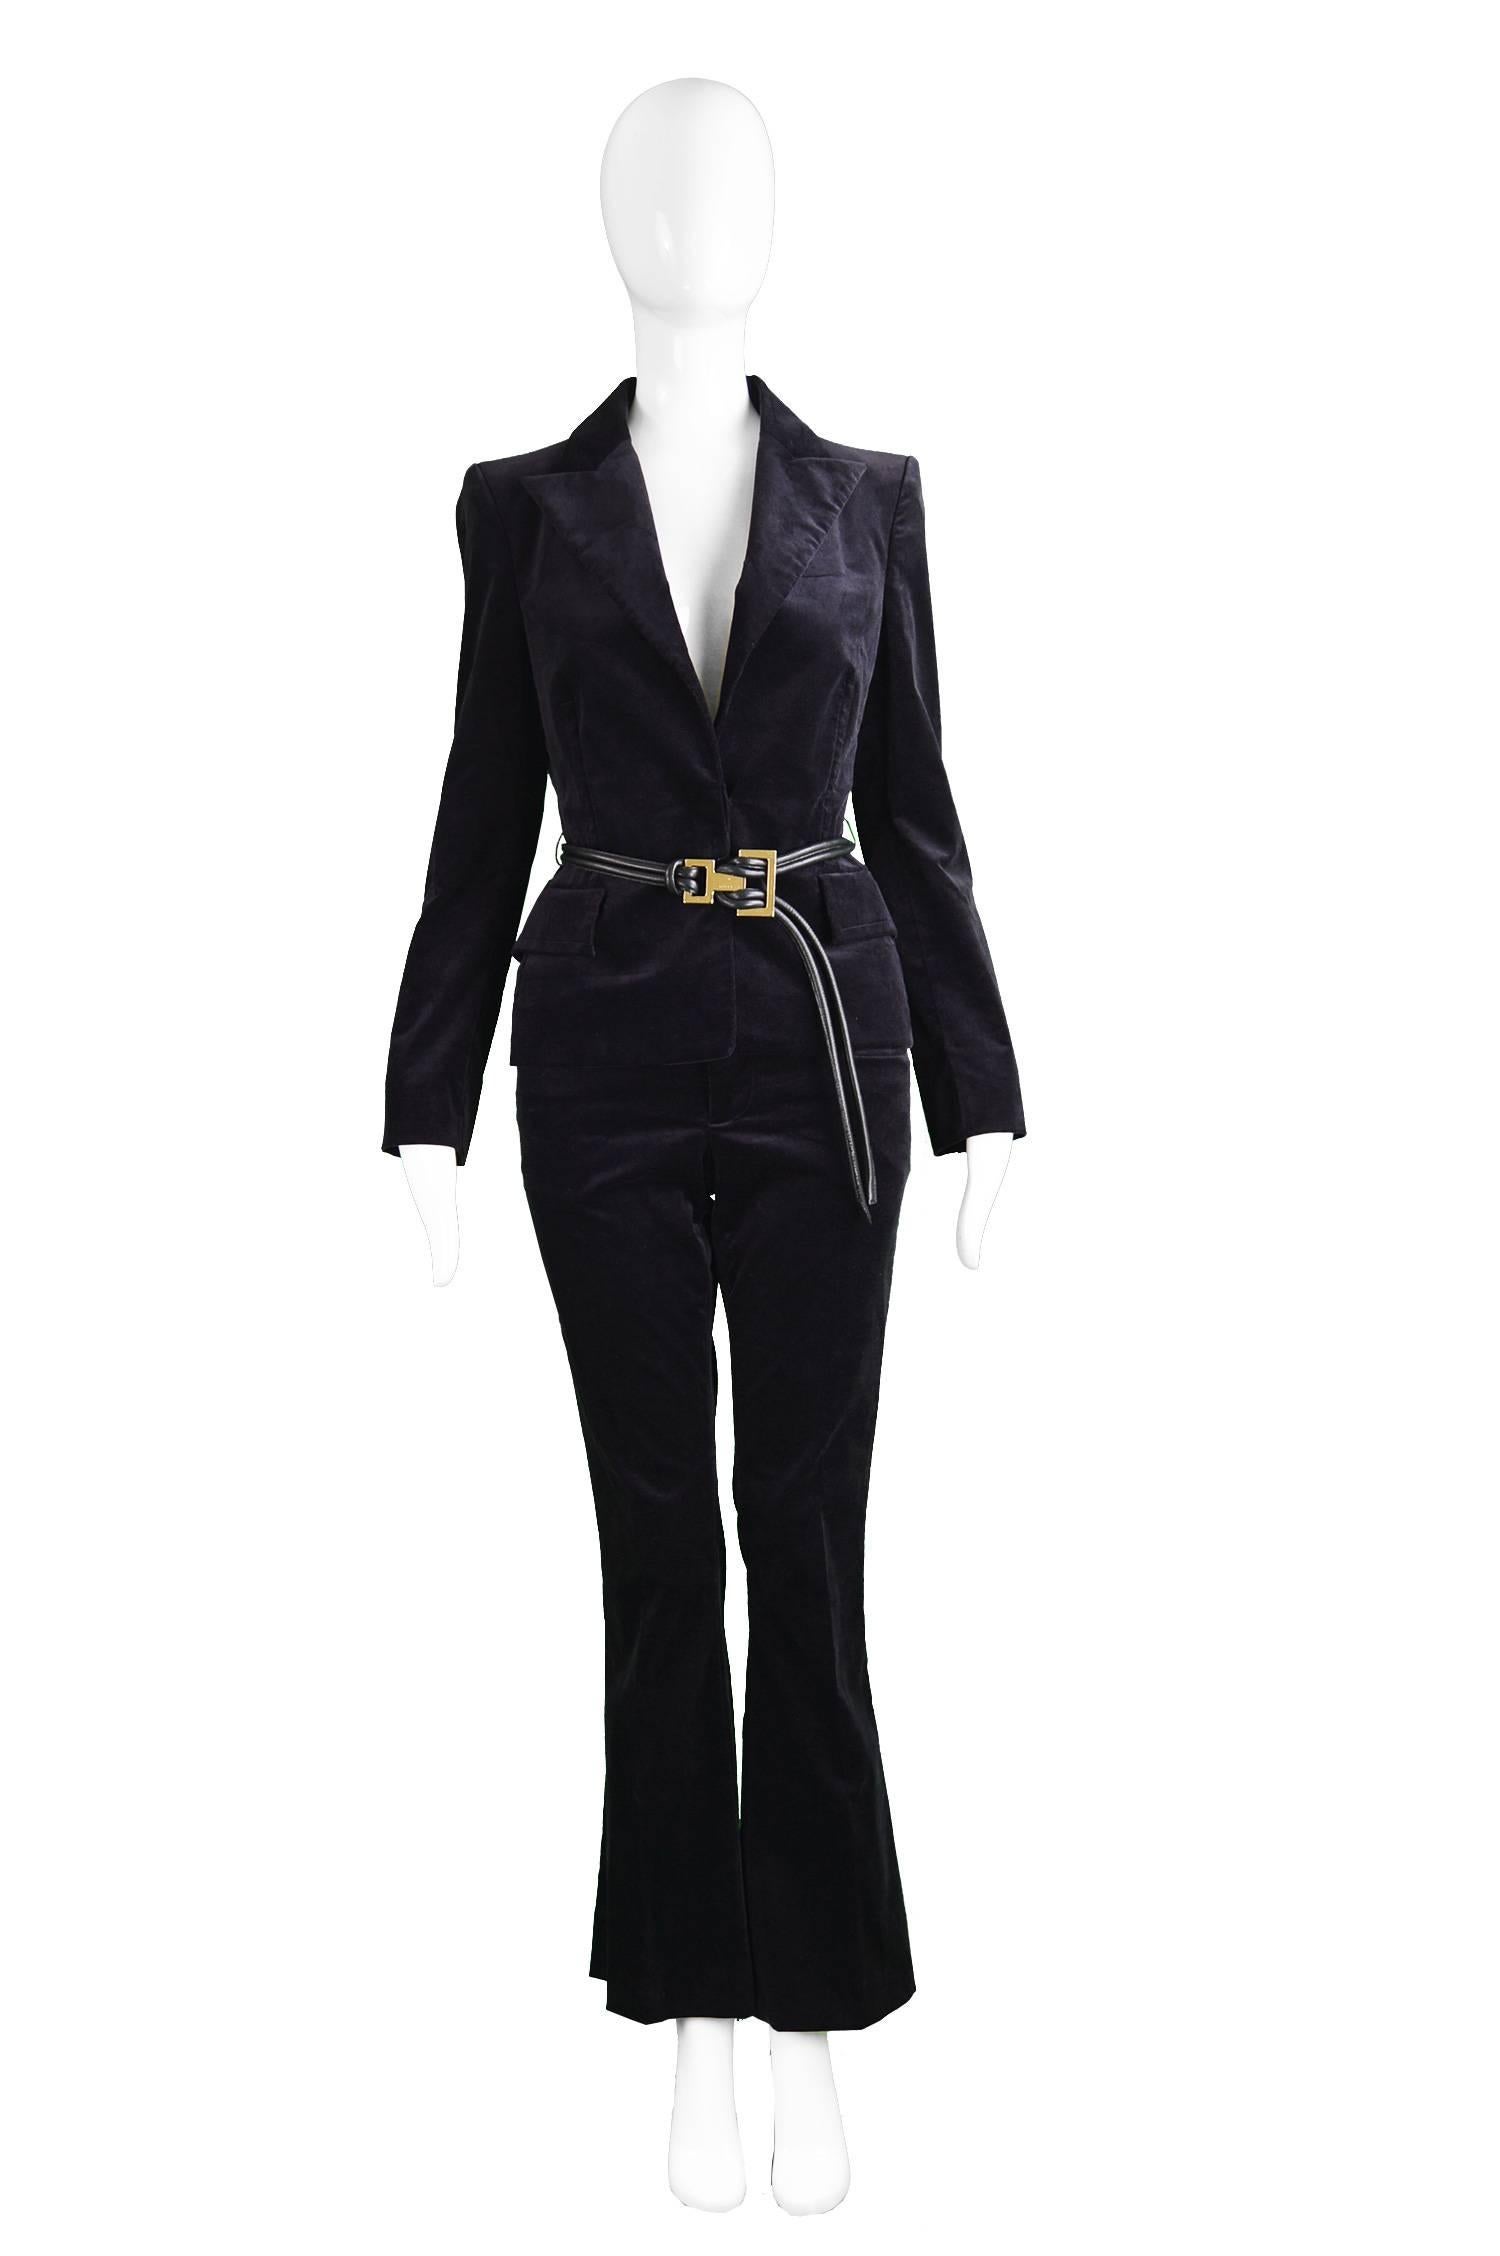 Tom Ford for Gucci Dark Purple Velvet Pant Suit with Leather Belt, Fall 2004

Estimated Size: UK 10 / US 6/ EU 38. Please check measurements.
Jacket
Bust - 34” / 86cm
Length (Shoulder to Hem) - 22” / 56cm
Shoulder to Shoulder - 15”  / 38cm
Sleeve